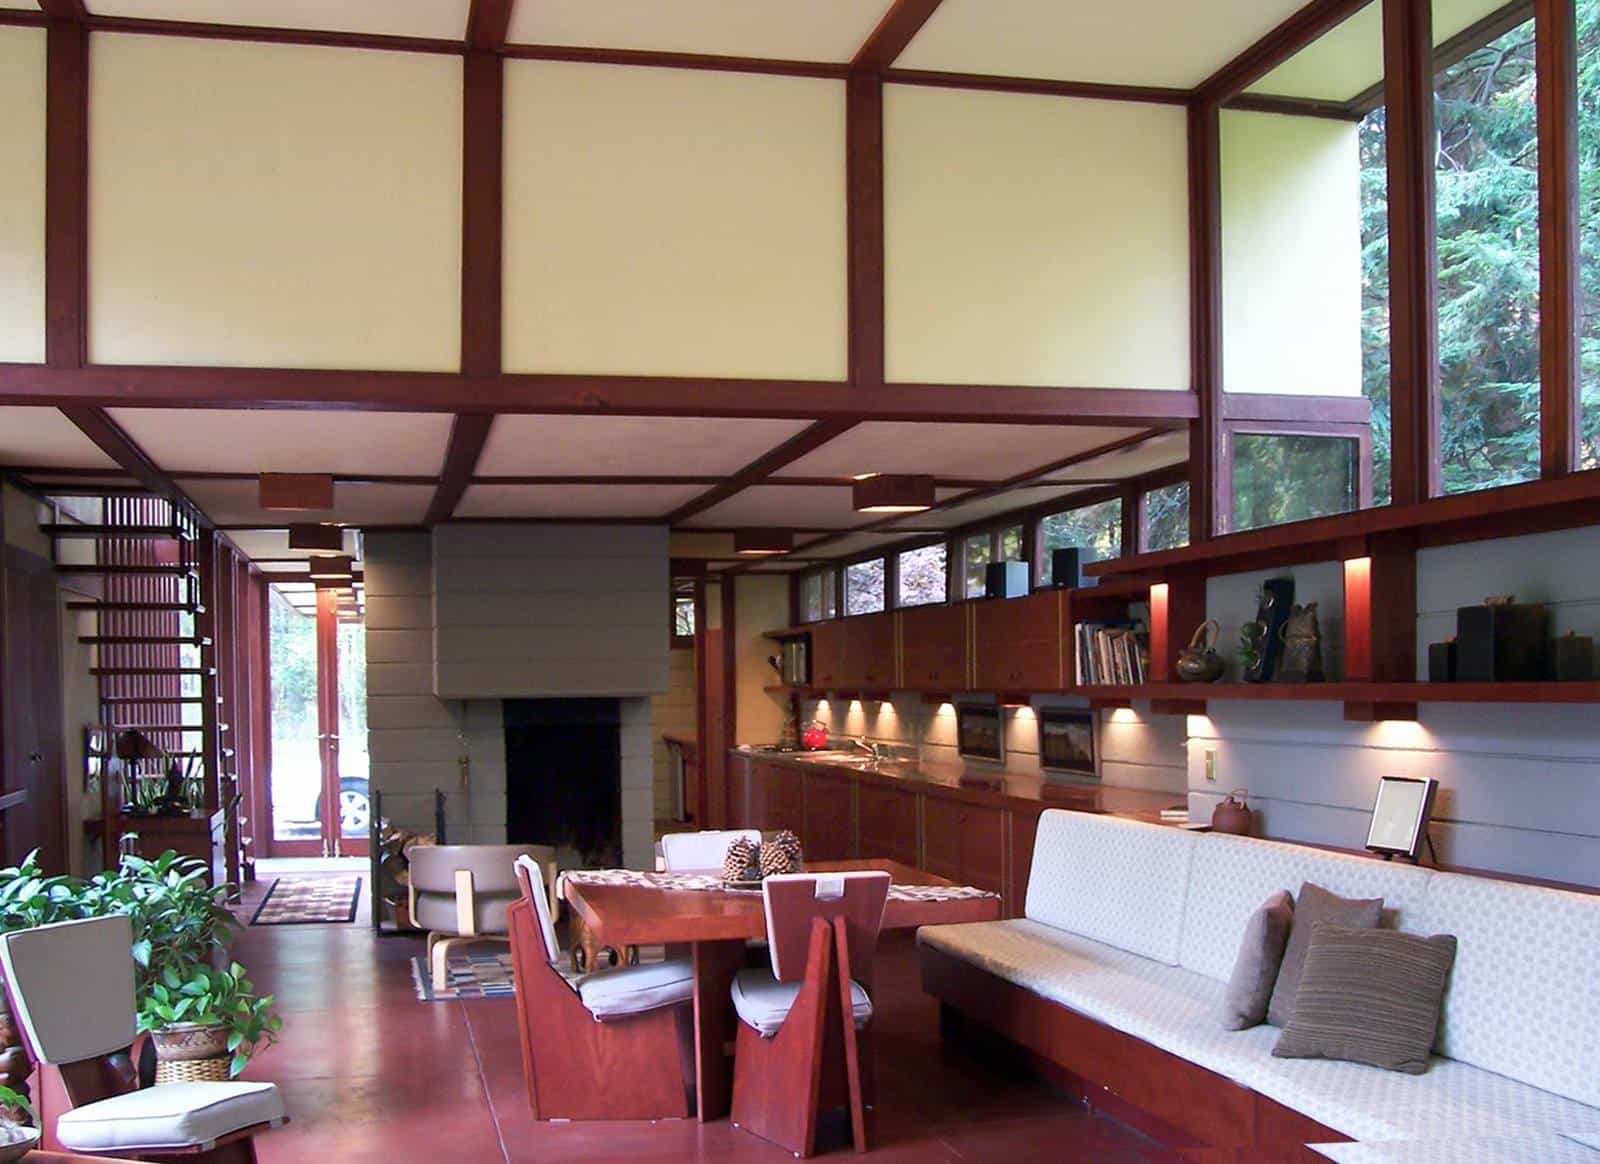 frank lloyd wright - penfield house - living room